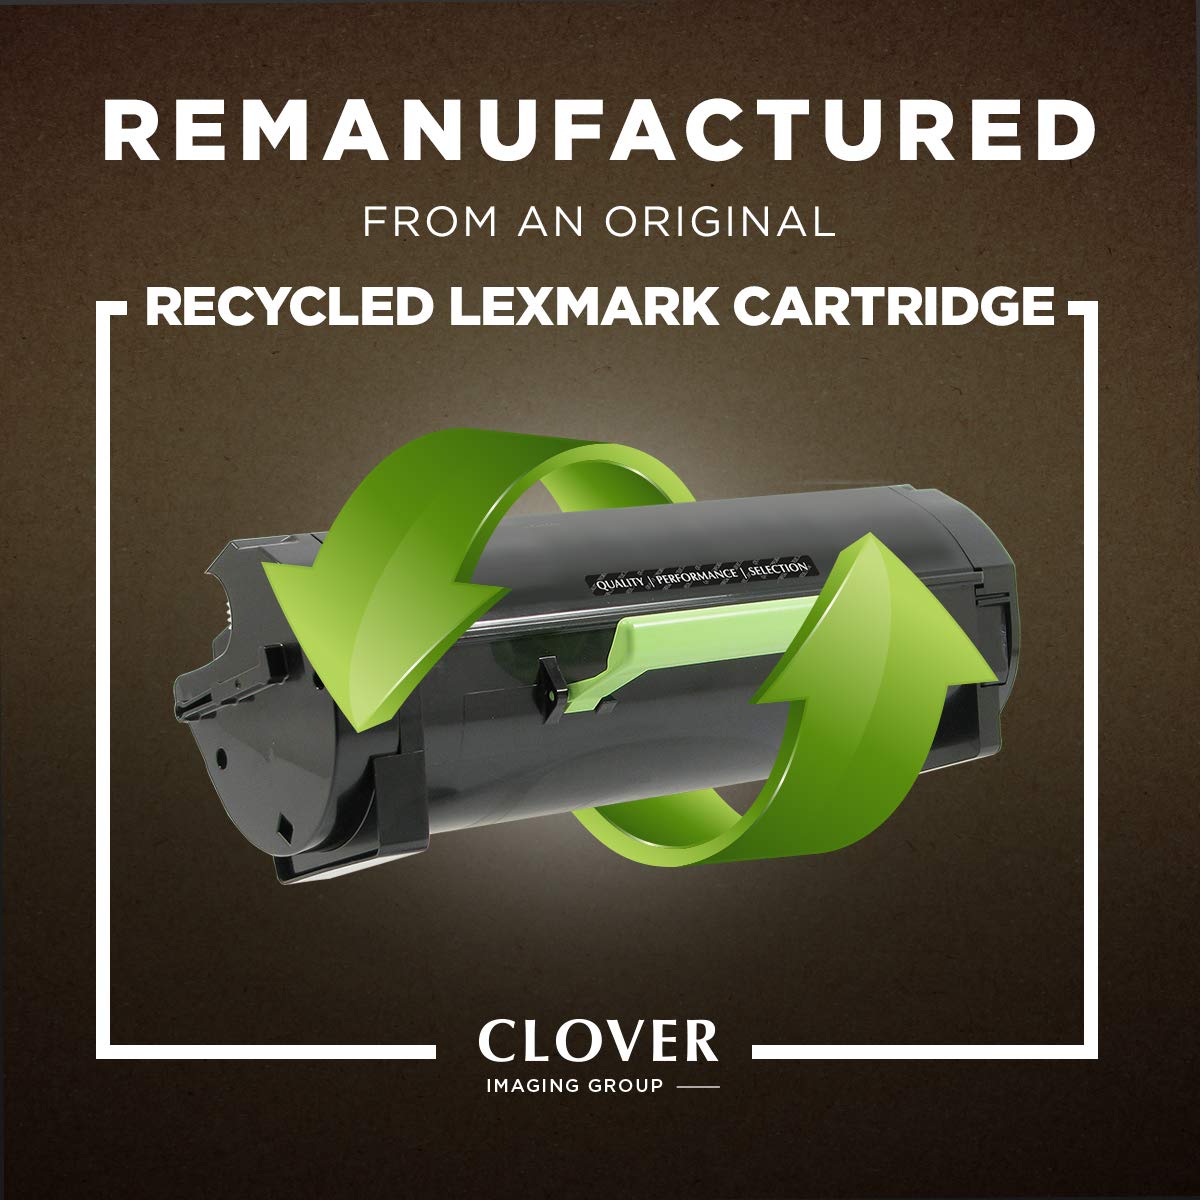 Clover Remanufactured Toner Cartridge Replacement for Lexmark C780/C782/X782 | Black | High Yield - Like New